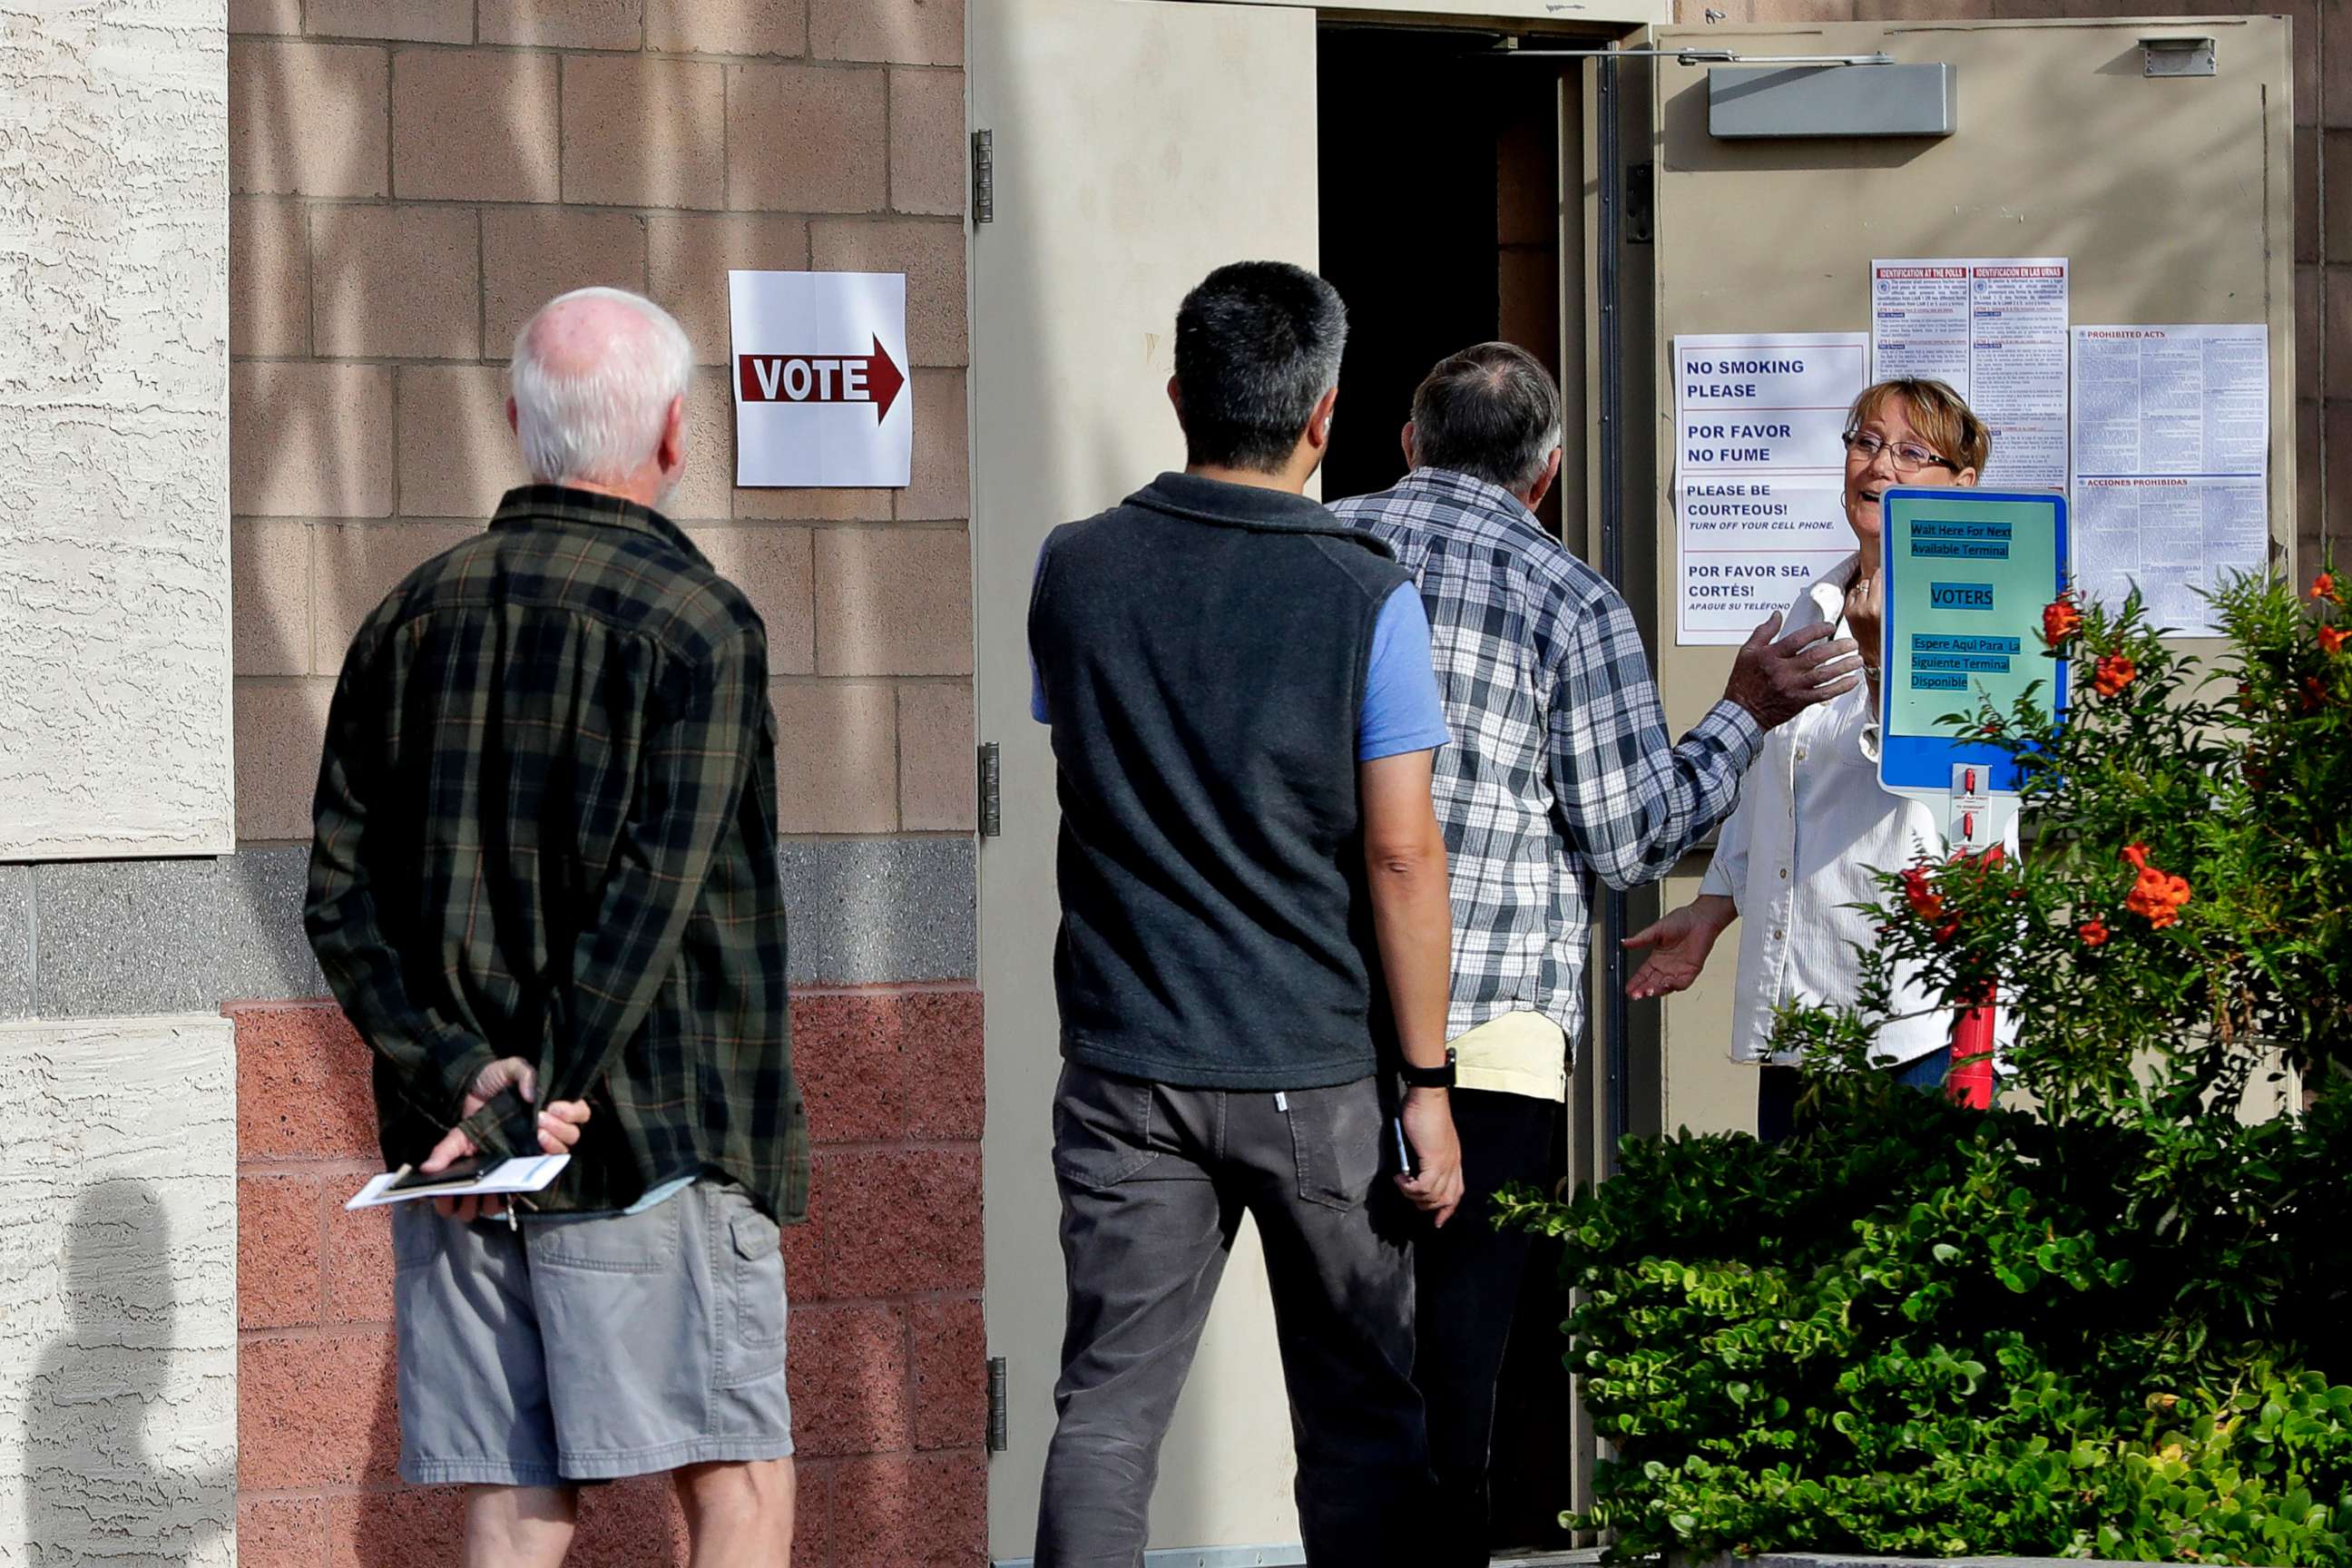 PHOTO: Arizona voters are held outside until other voters leave the polling station prior to casting their ballot in the Arizona presidential preference election Tuesday, March 17, 2020, in Phoenix.